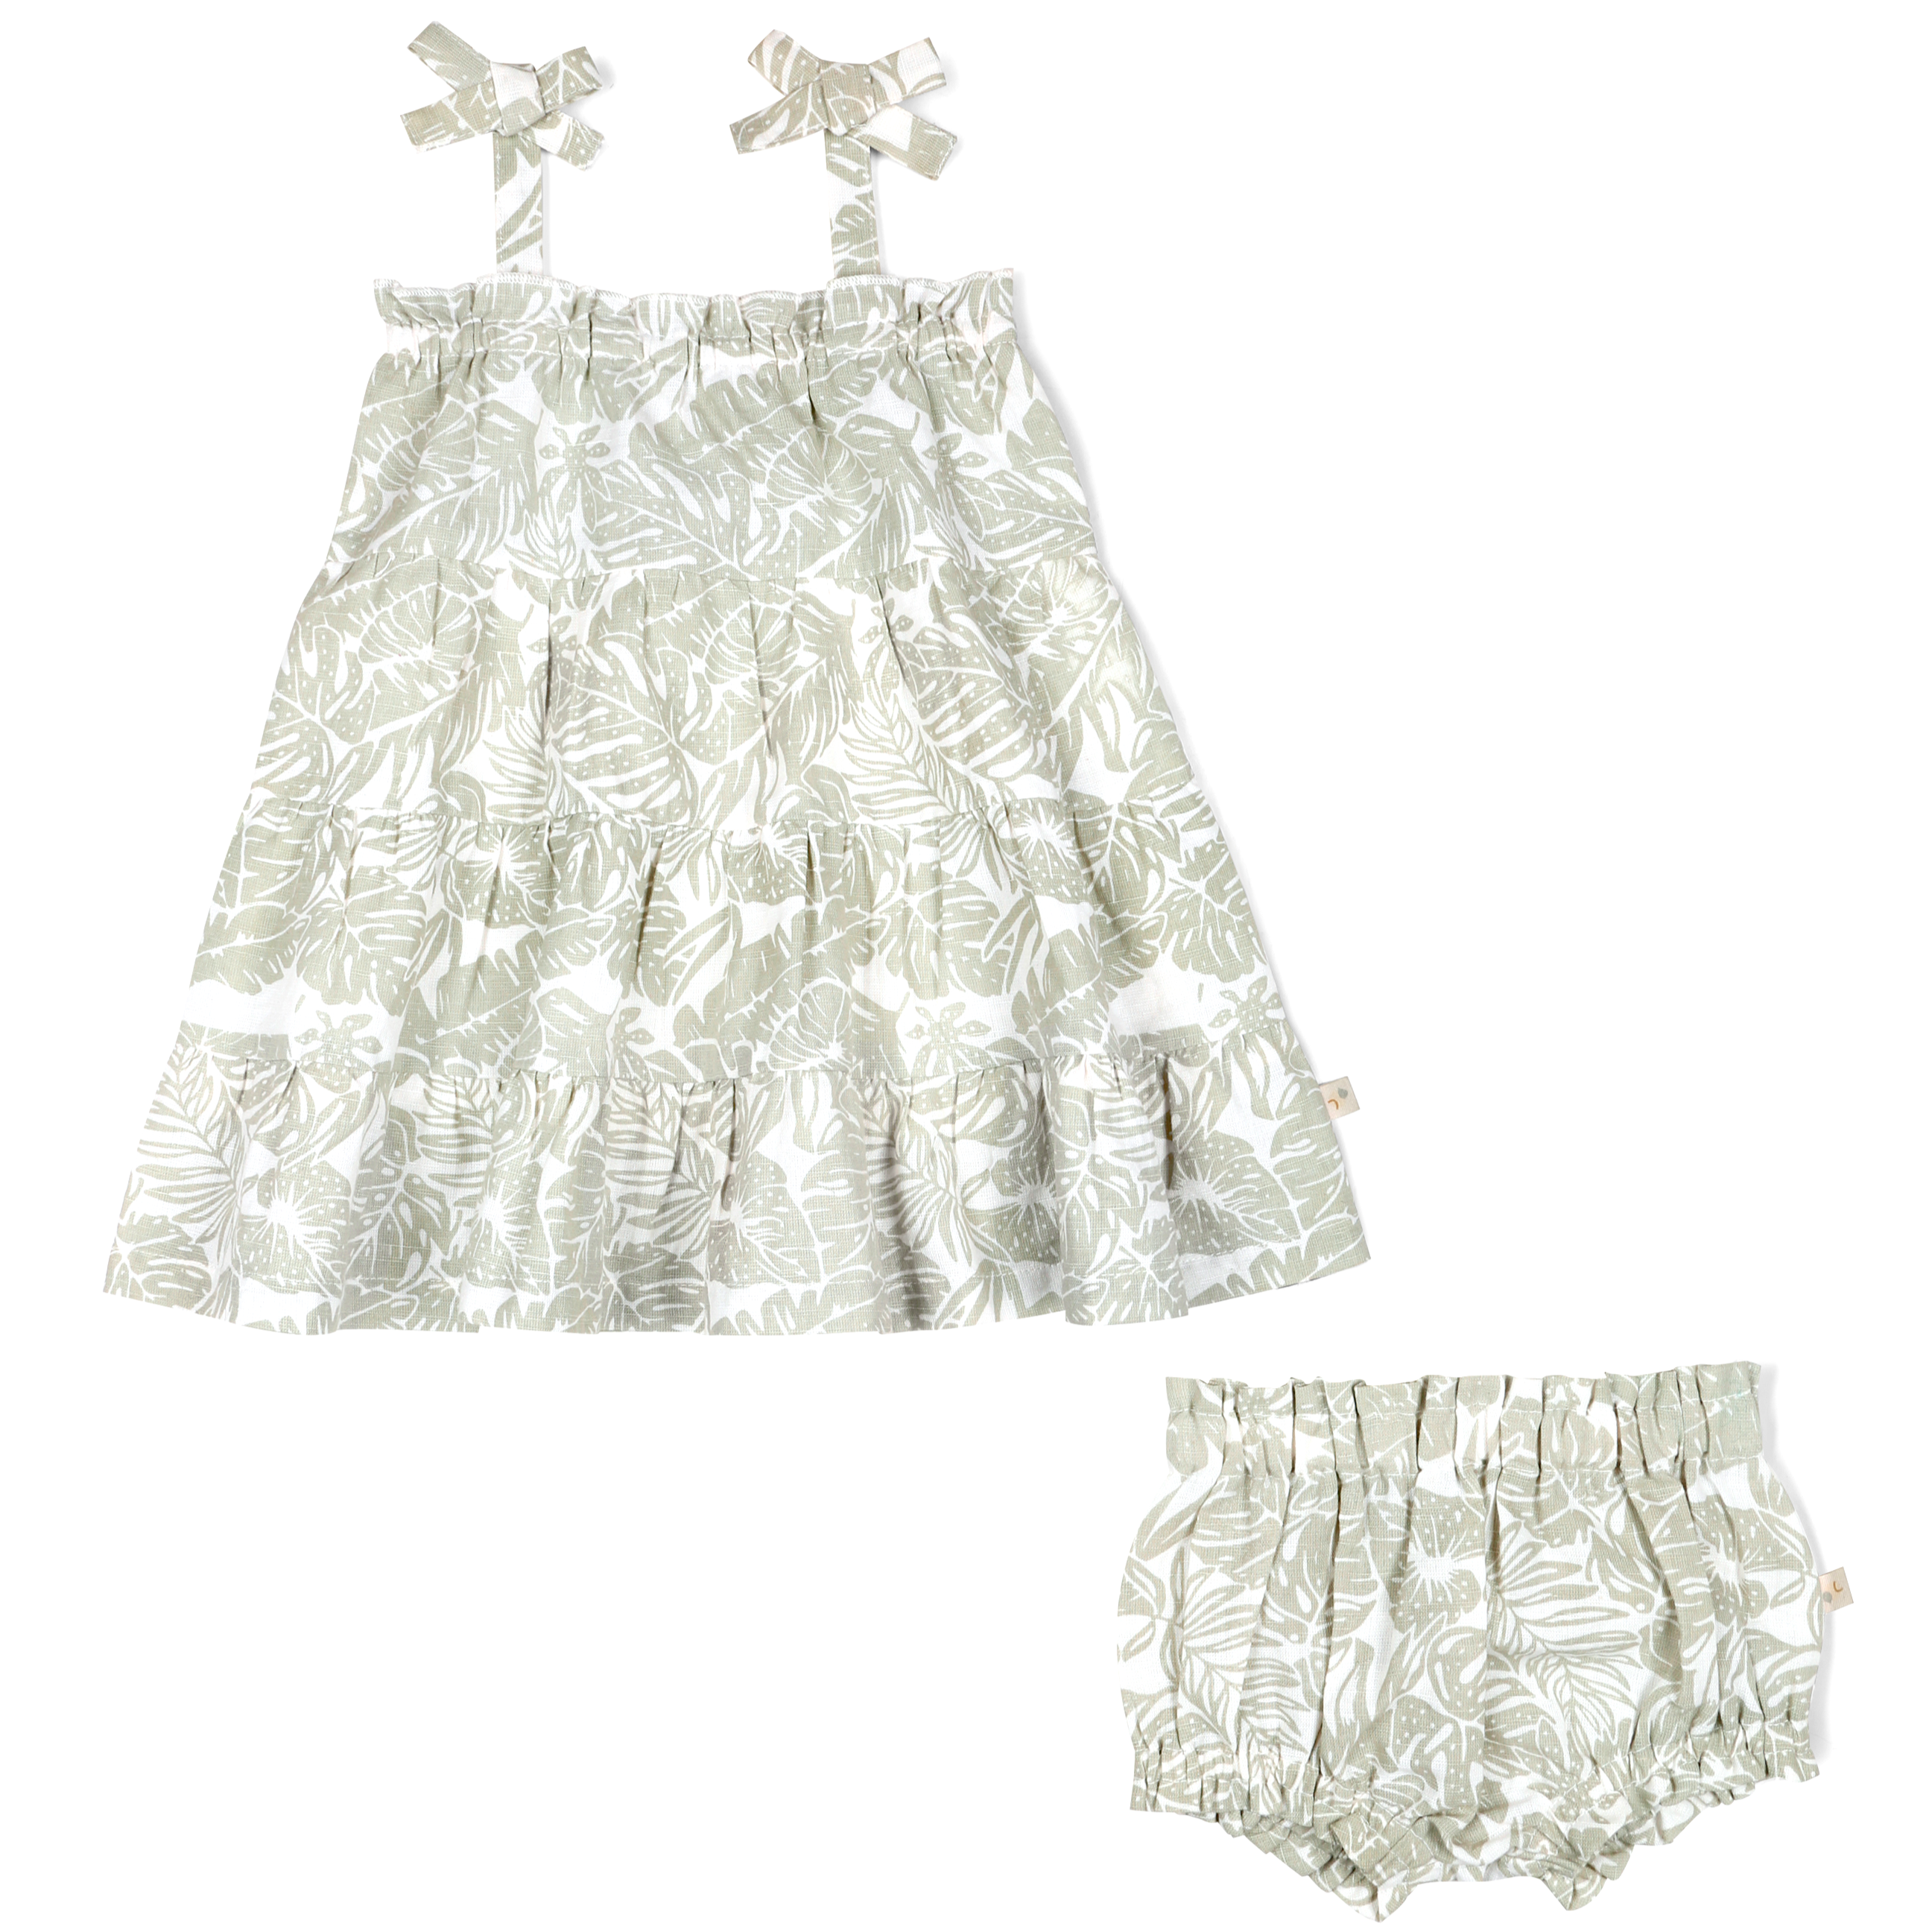 A baby girl's outfit featuring an Organic Linen Tiered Strap Dress in Palms with a matching pair of bloomers and bow-knot hairbands from Makemake Organics, all laid out on a white background.